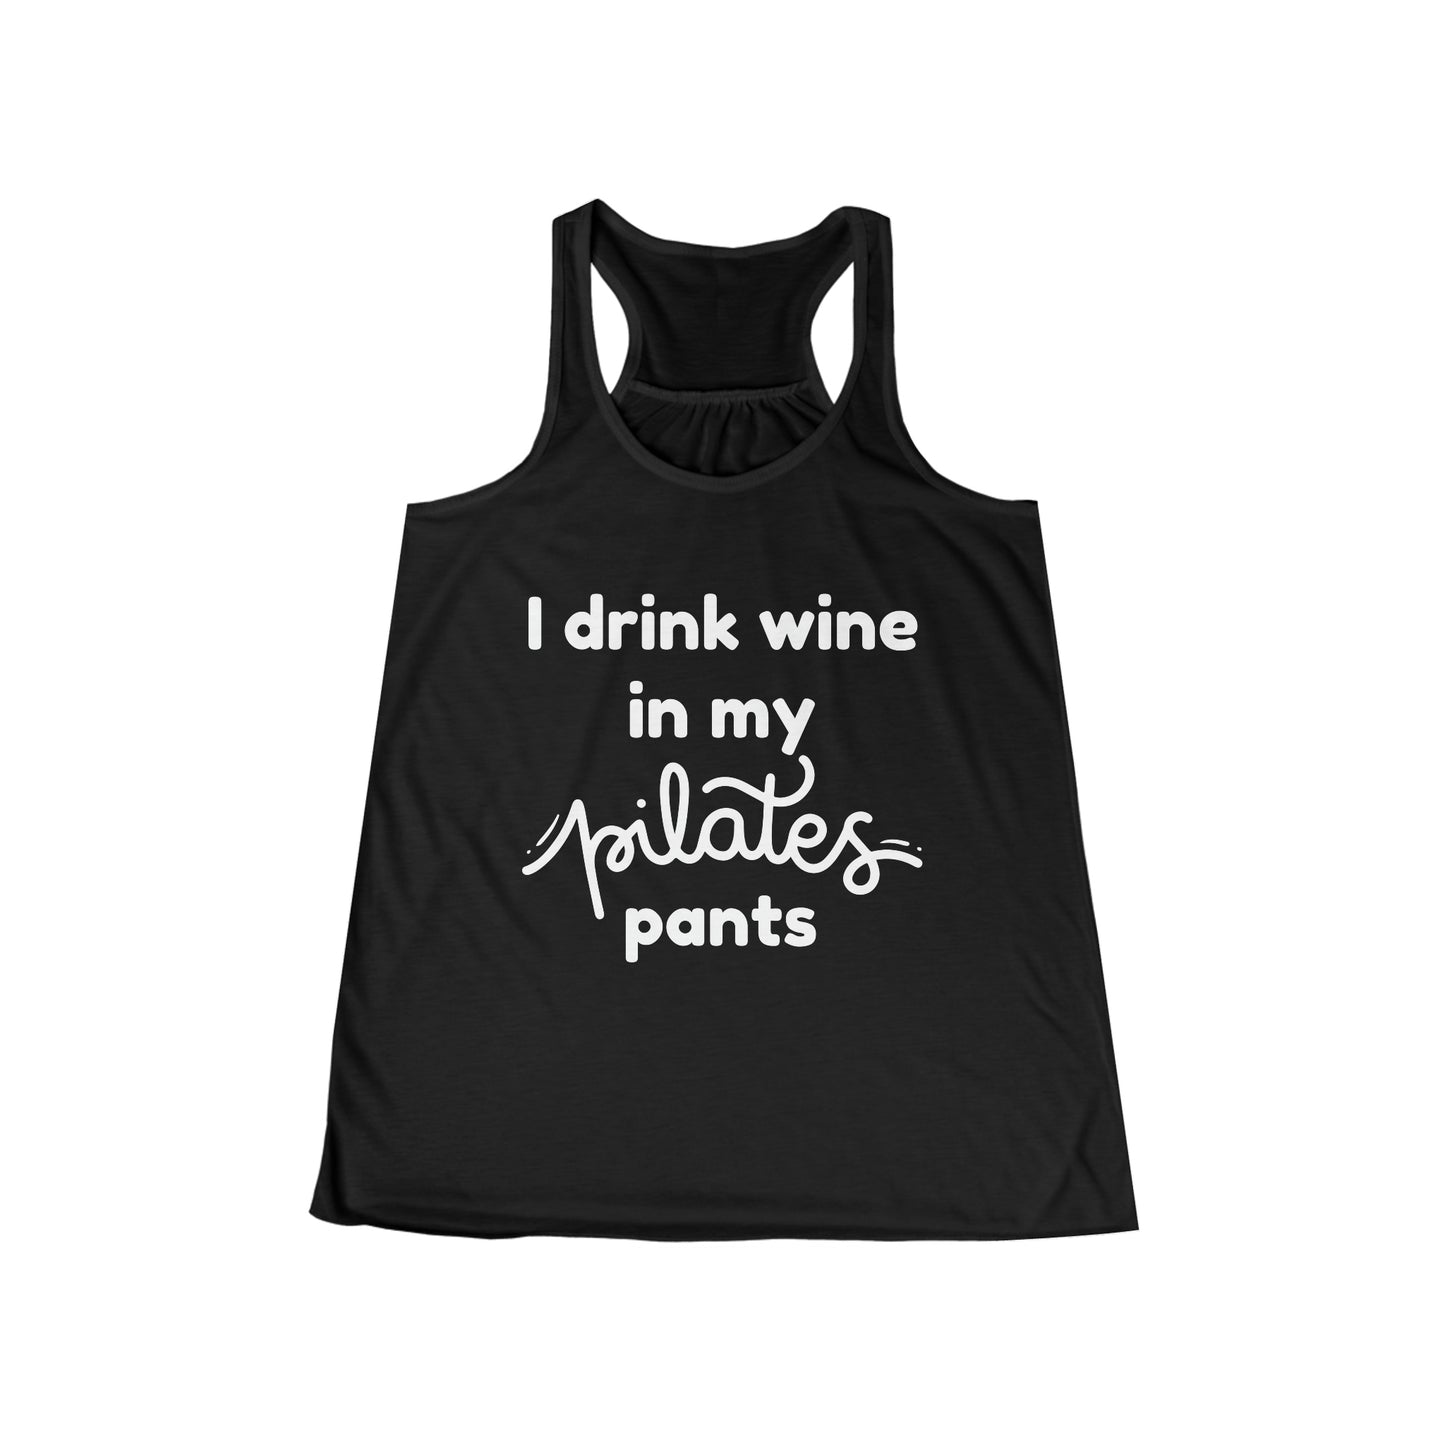 I Drink Wine in My Pilates Pants Tank Top